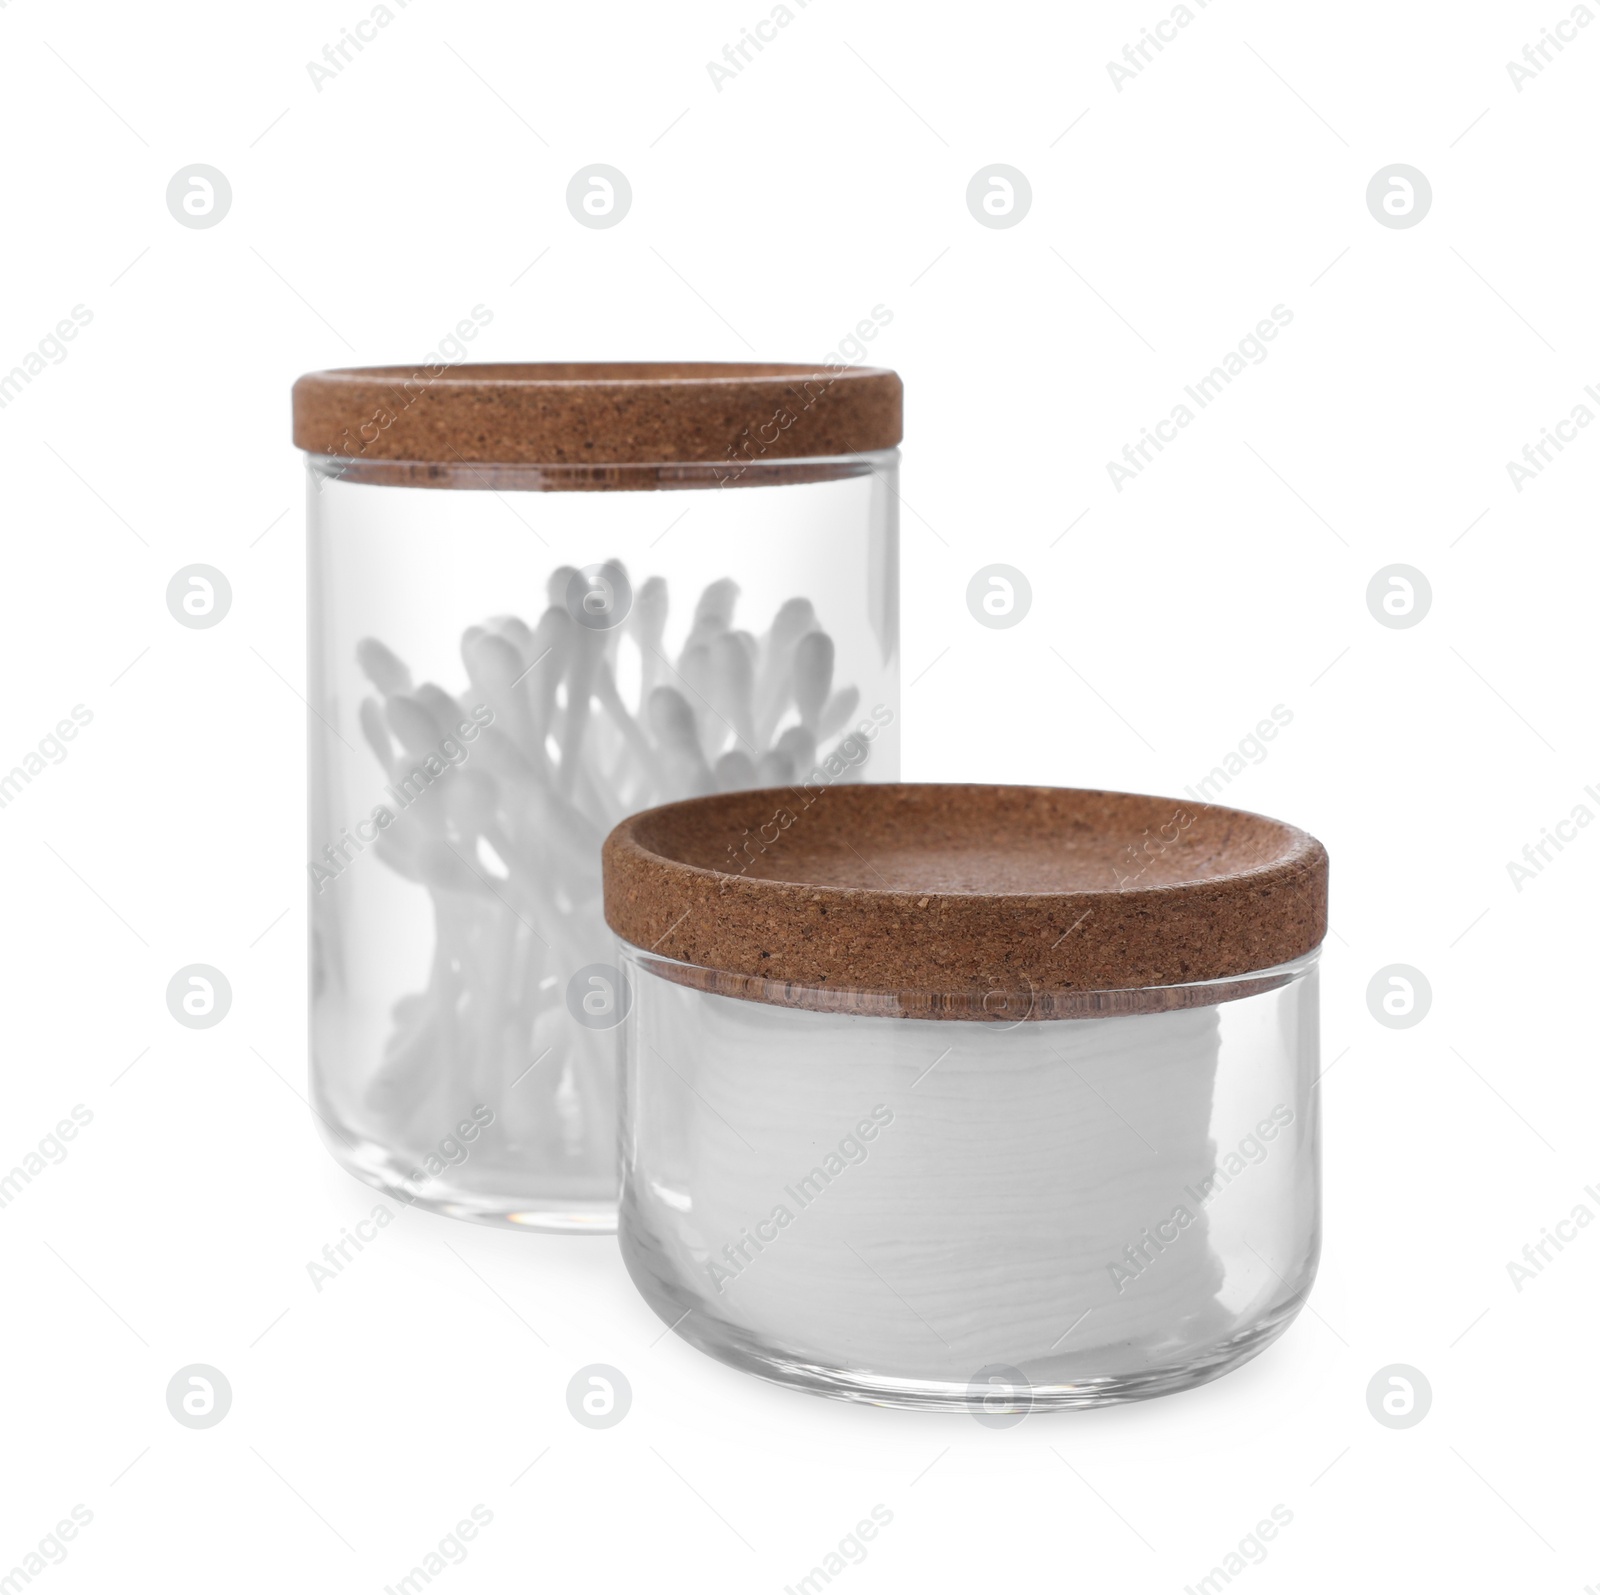 Photo of Cotton pads and swabs in glass jars on white background